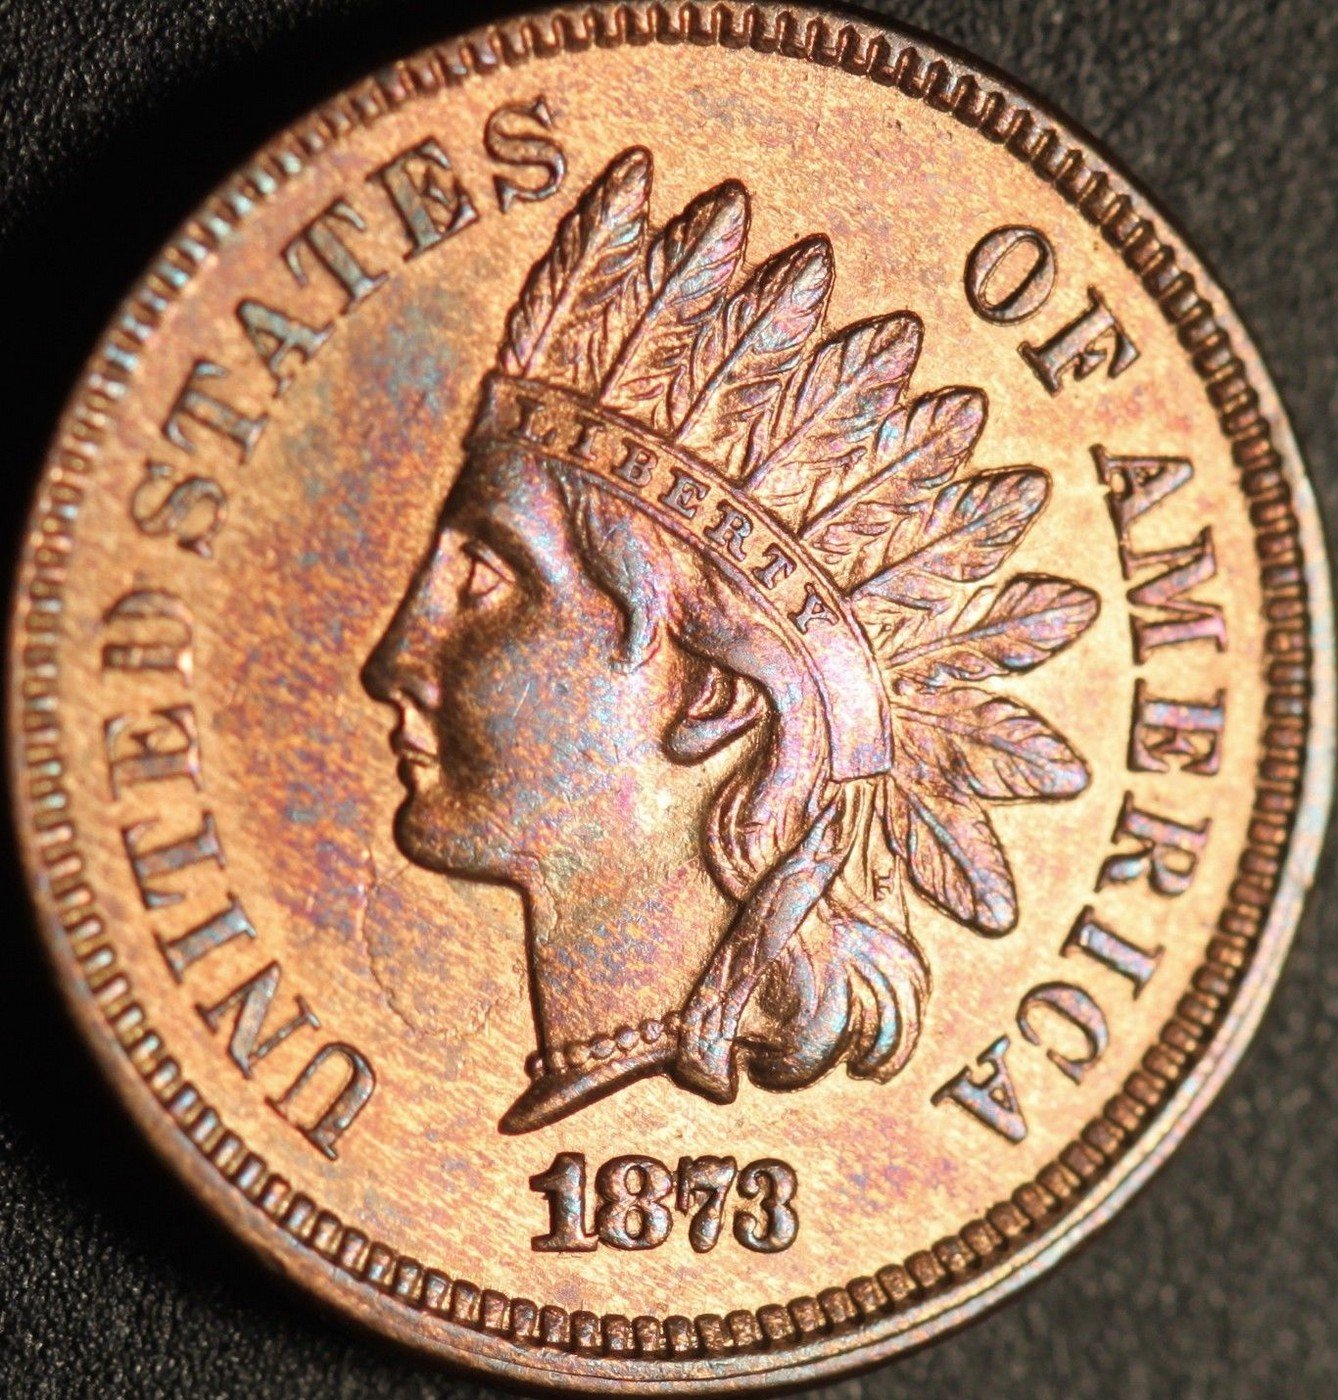 1873 Open 3 RPD-003 - Indian Head Cent - Photo by Ed Nathanson